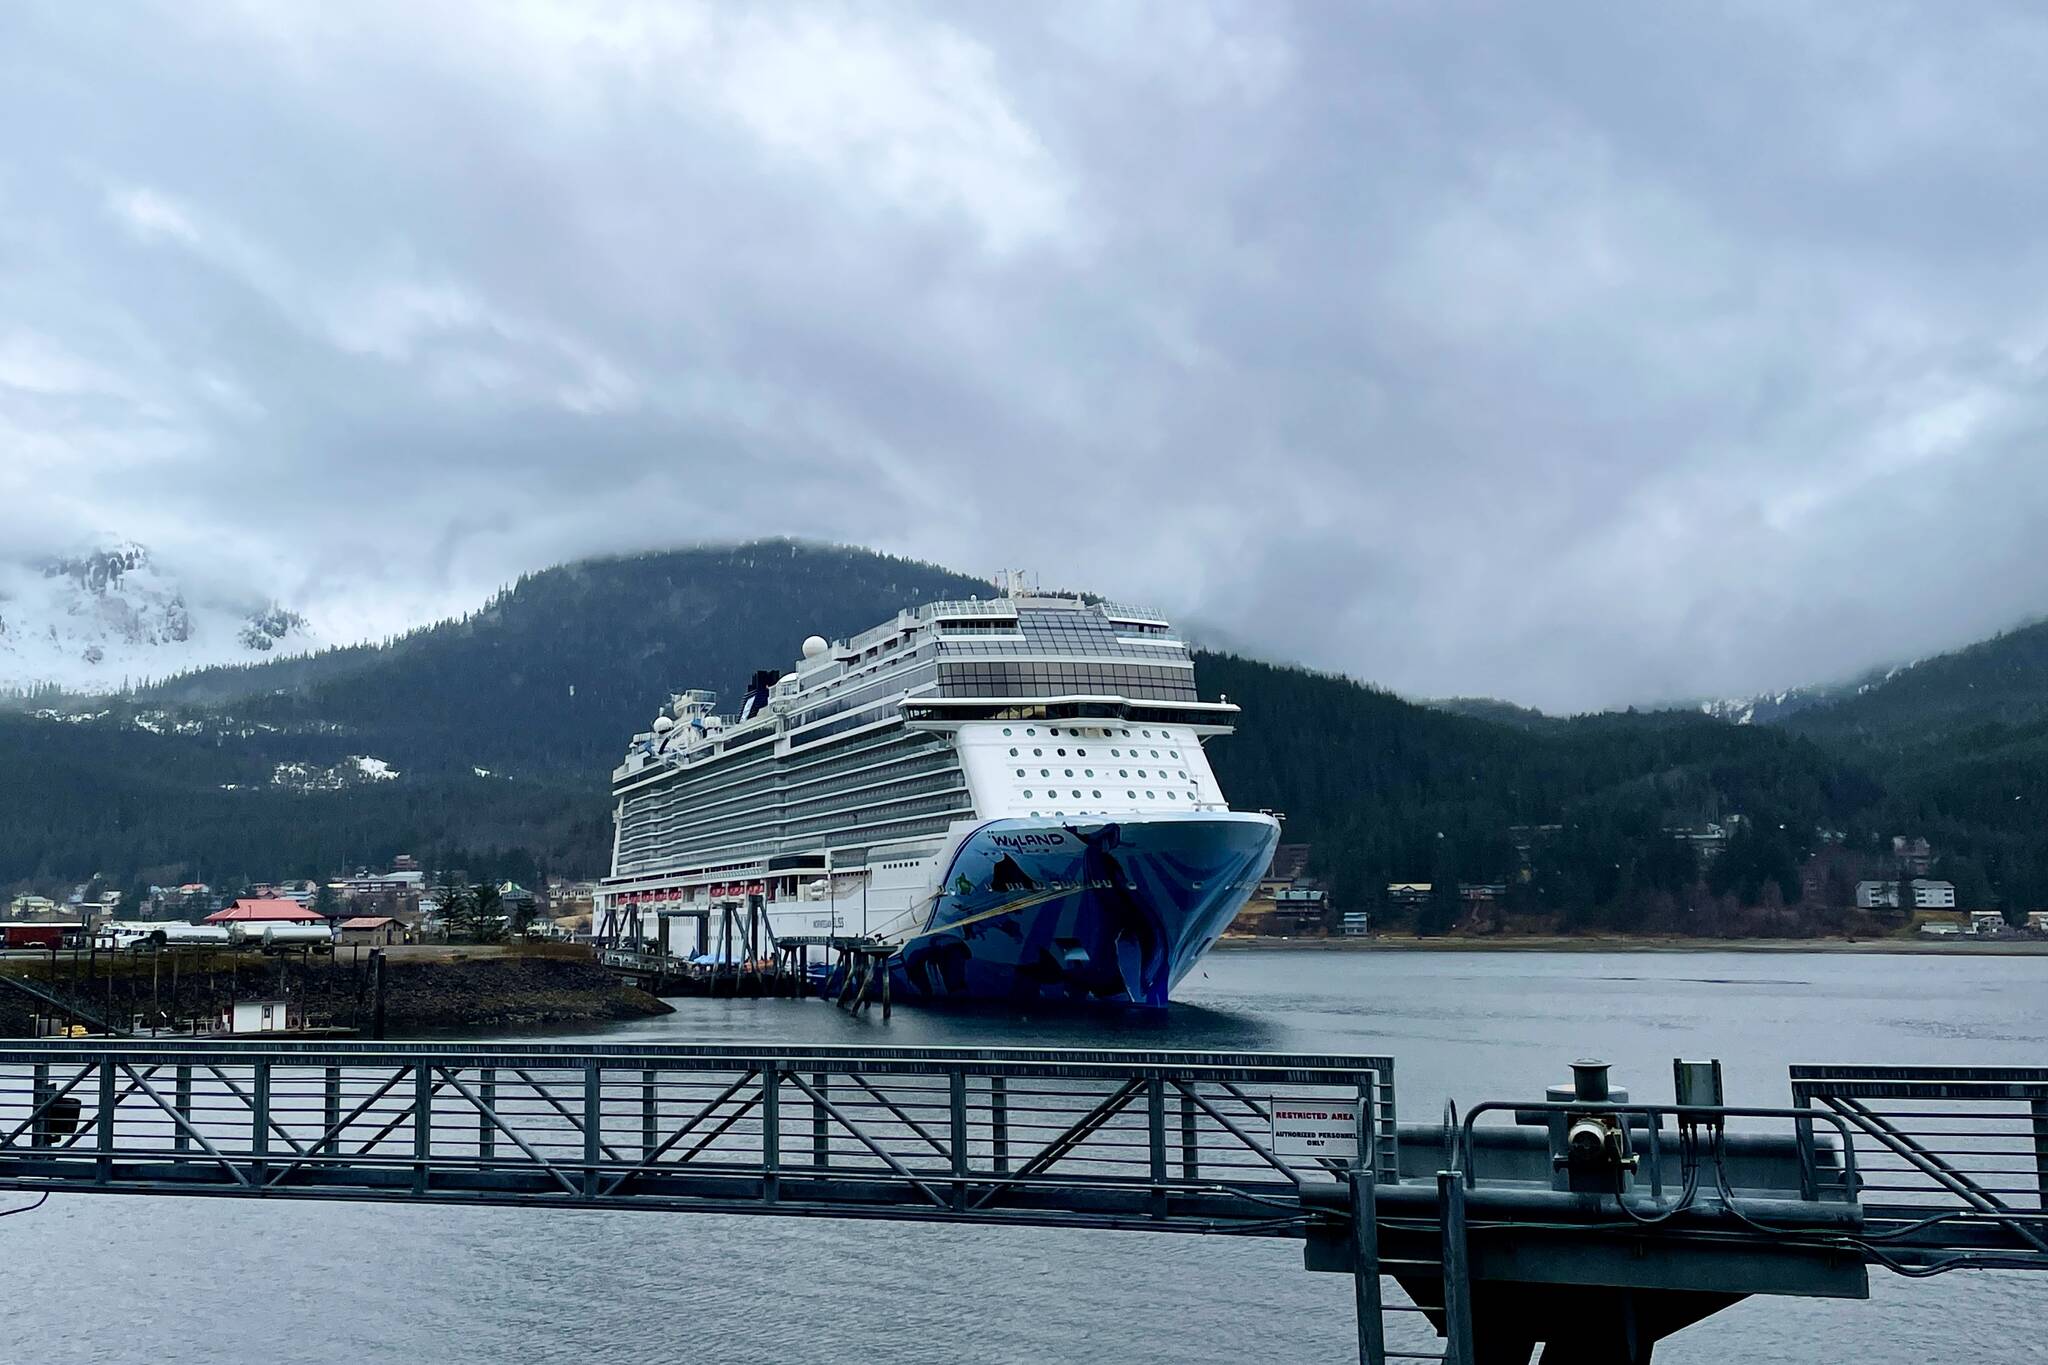 Michael S. Lockett / Juneau Empire
The Norwegian Bliss arrives Monday in Juneau, the first cruise of the 2022 season.